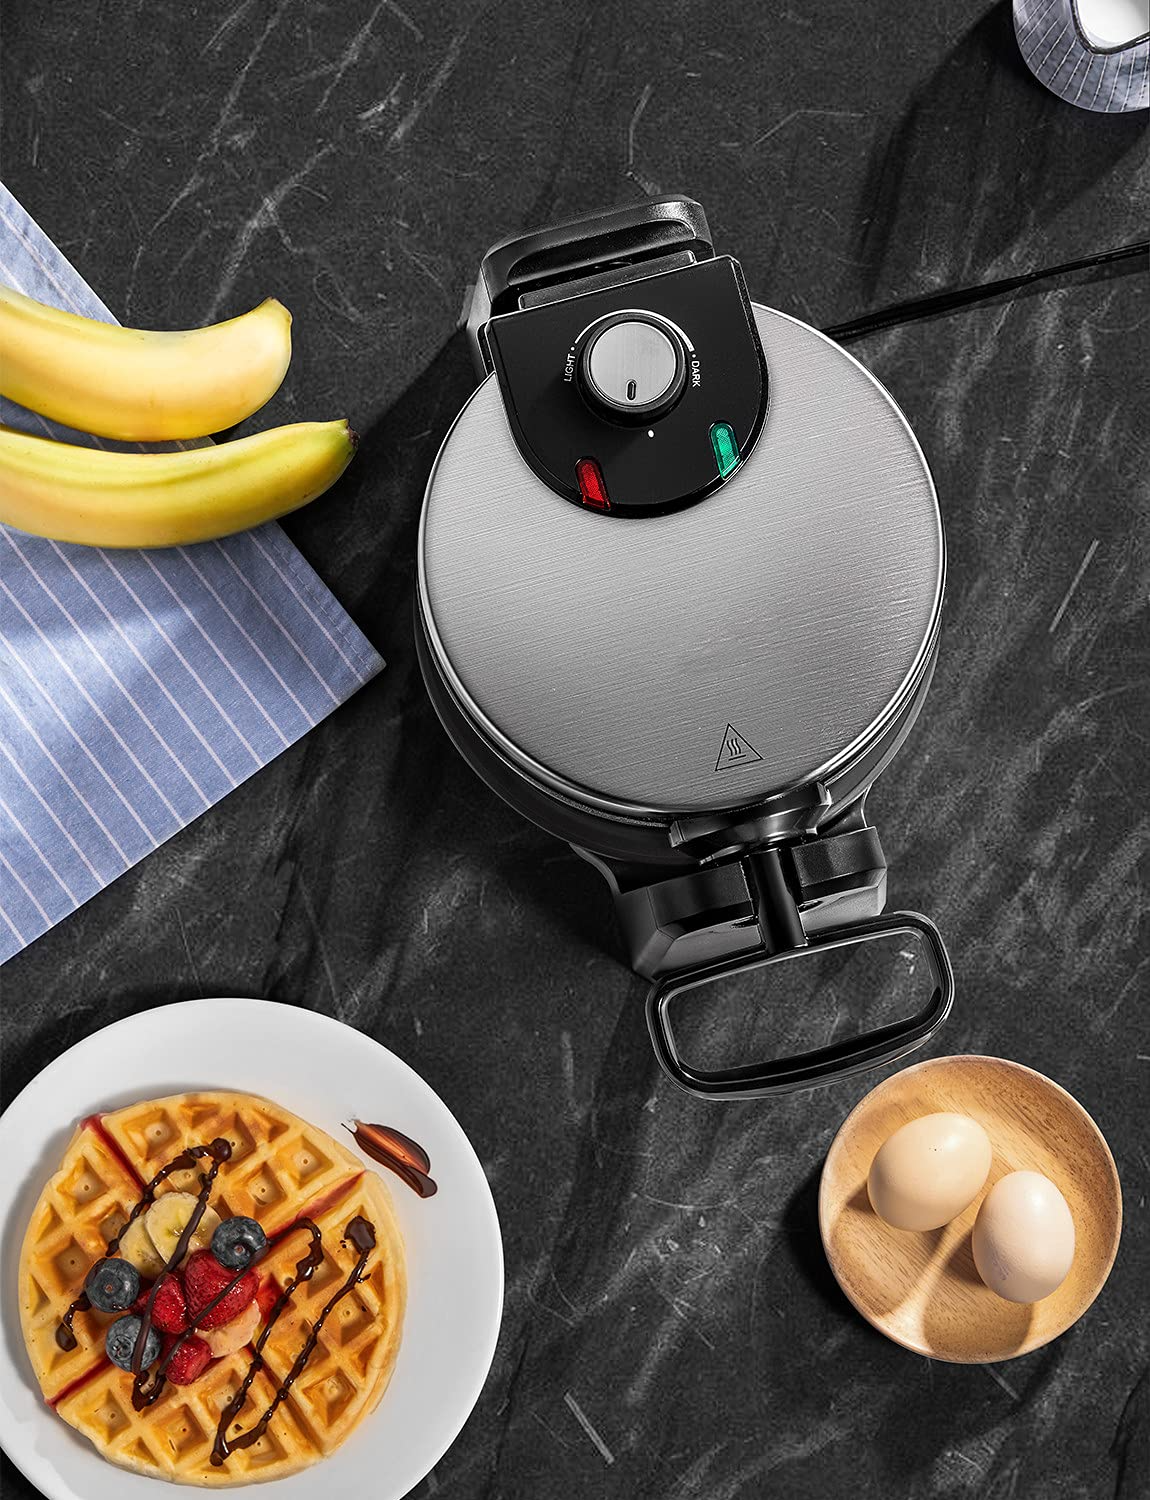 AICOOK | Classic Rotating Belgian Waffle Maker, 180° Flip Waffle Iron for Perfect 1" Thick Waffles, PFOA Free Nonstick Plates & Removable Drip Tray for Easy Clean Up, 1200W Browning Control, Stainless Steel